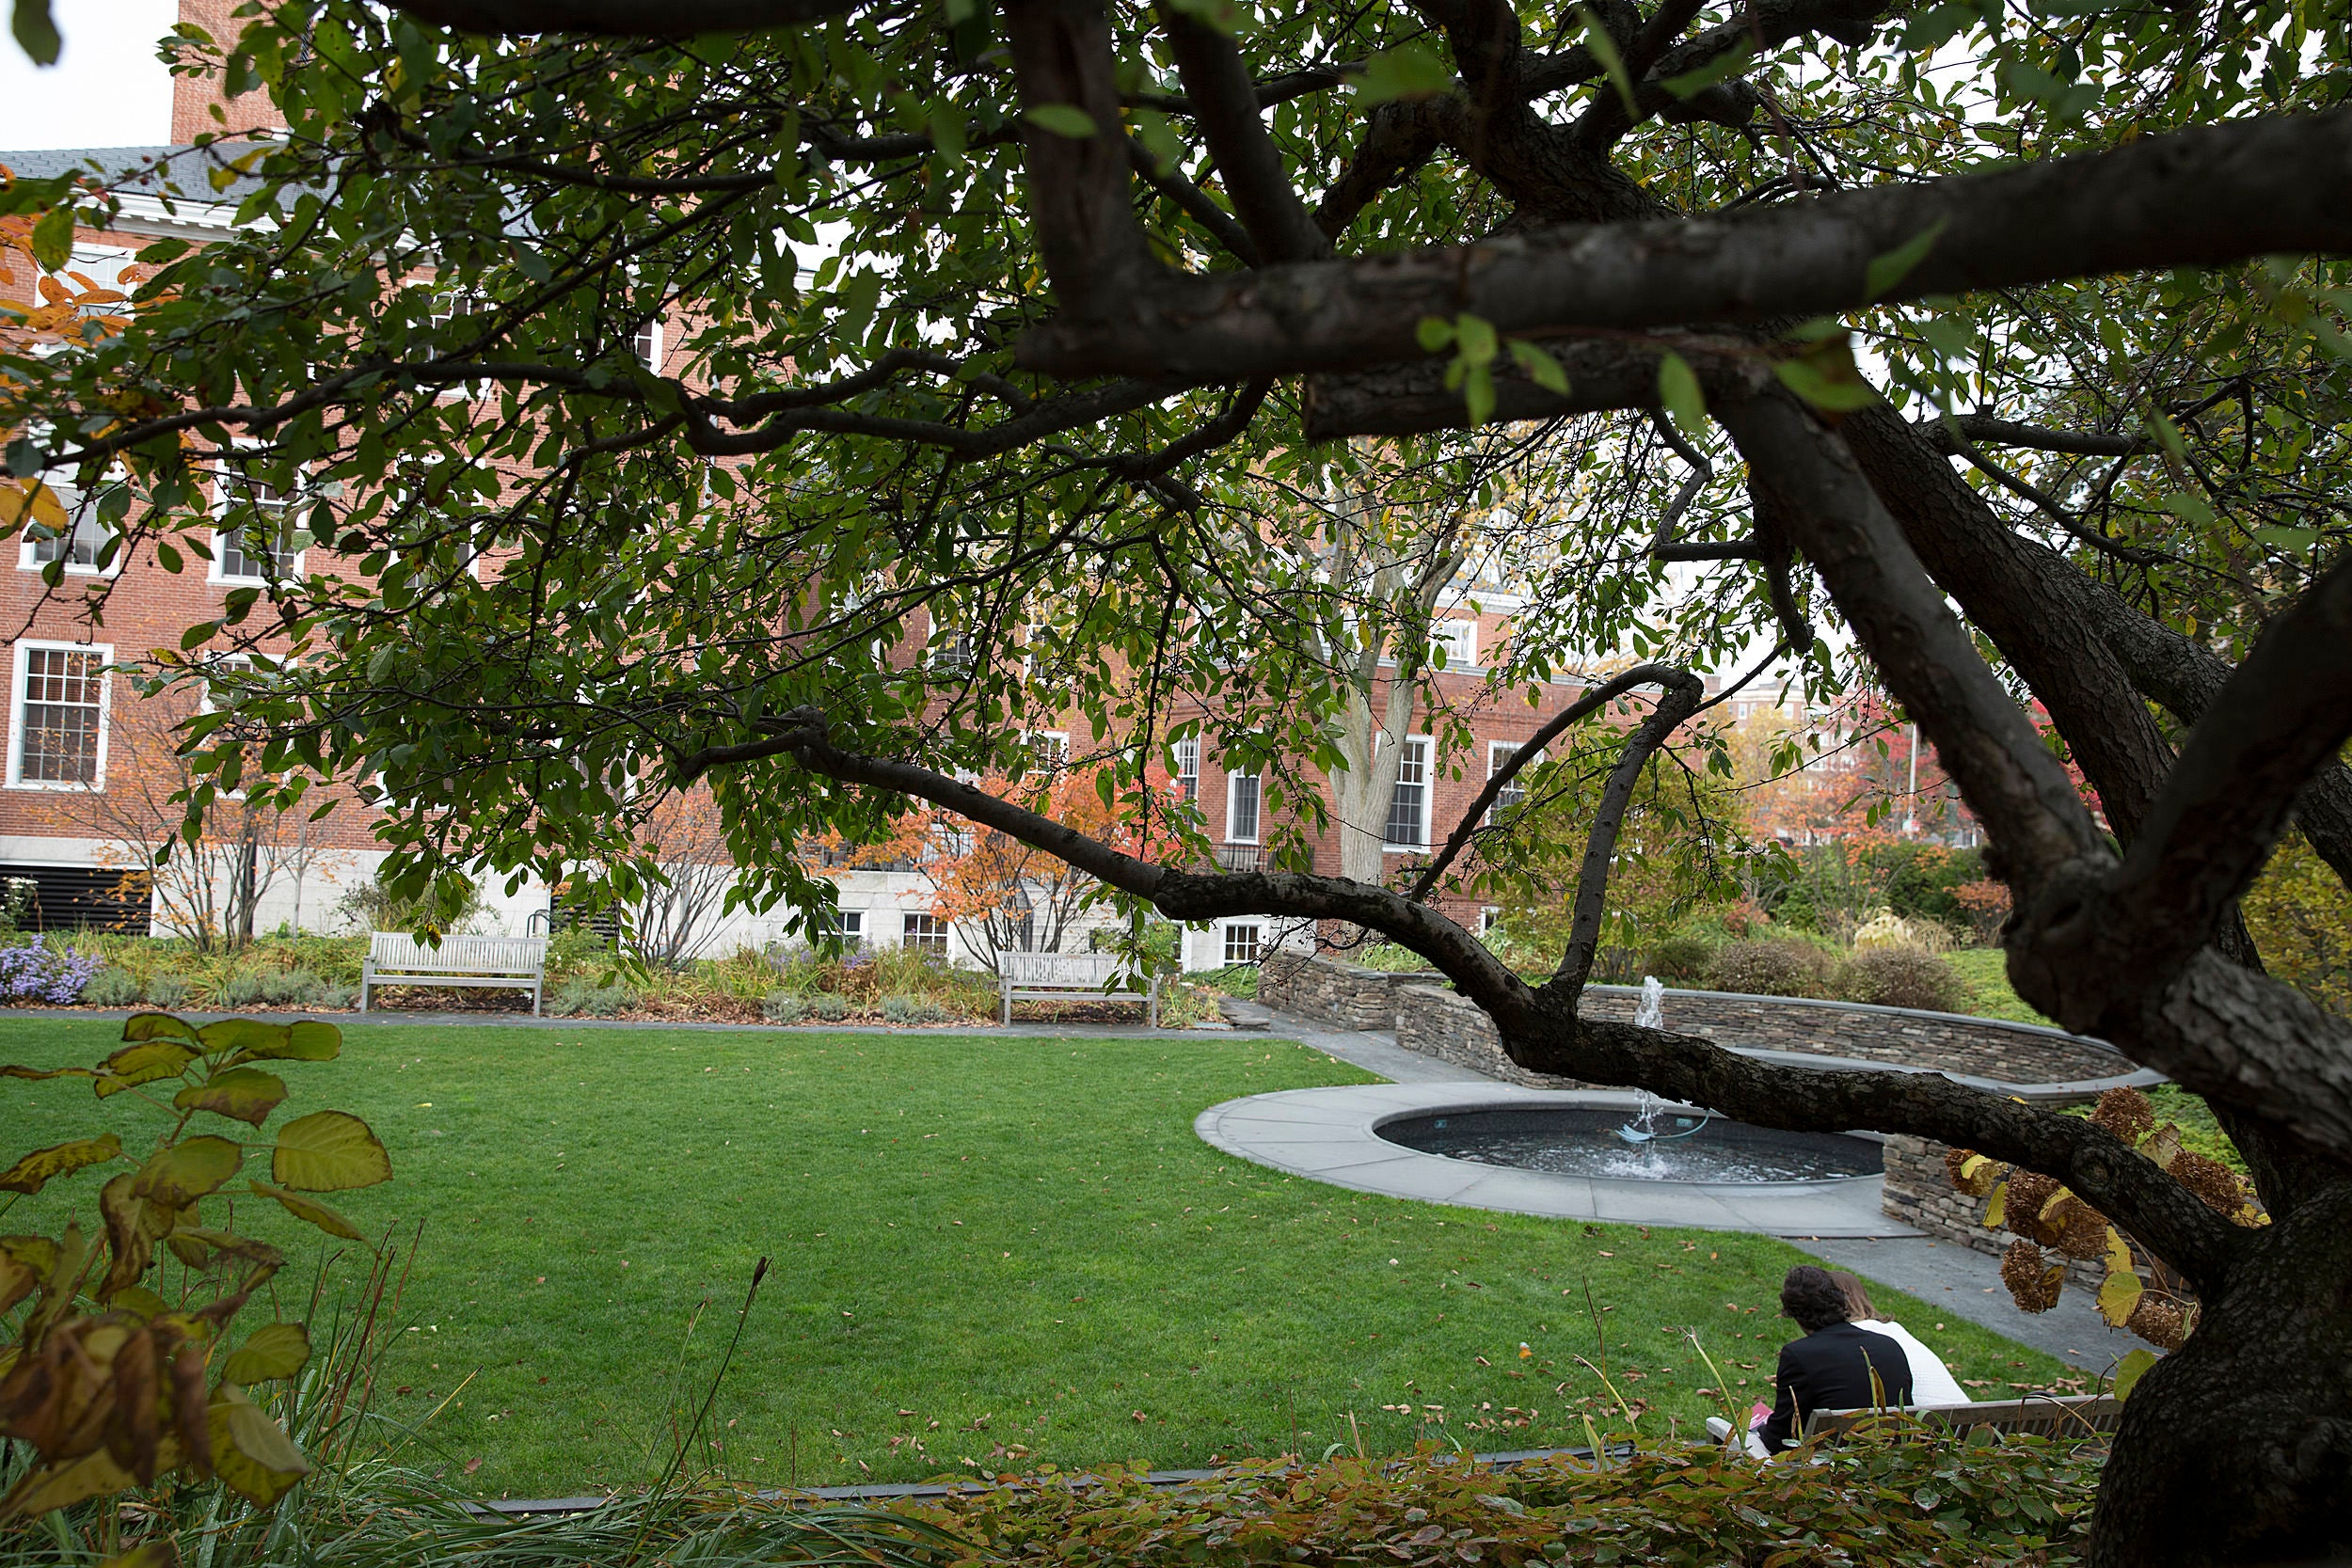 The Sunken Garden in Radcliffe Yard framed by long tree branches.